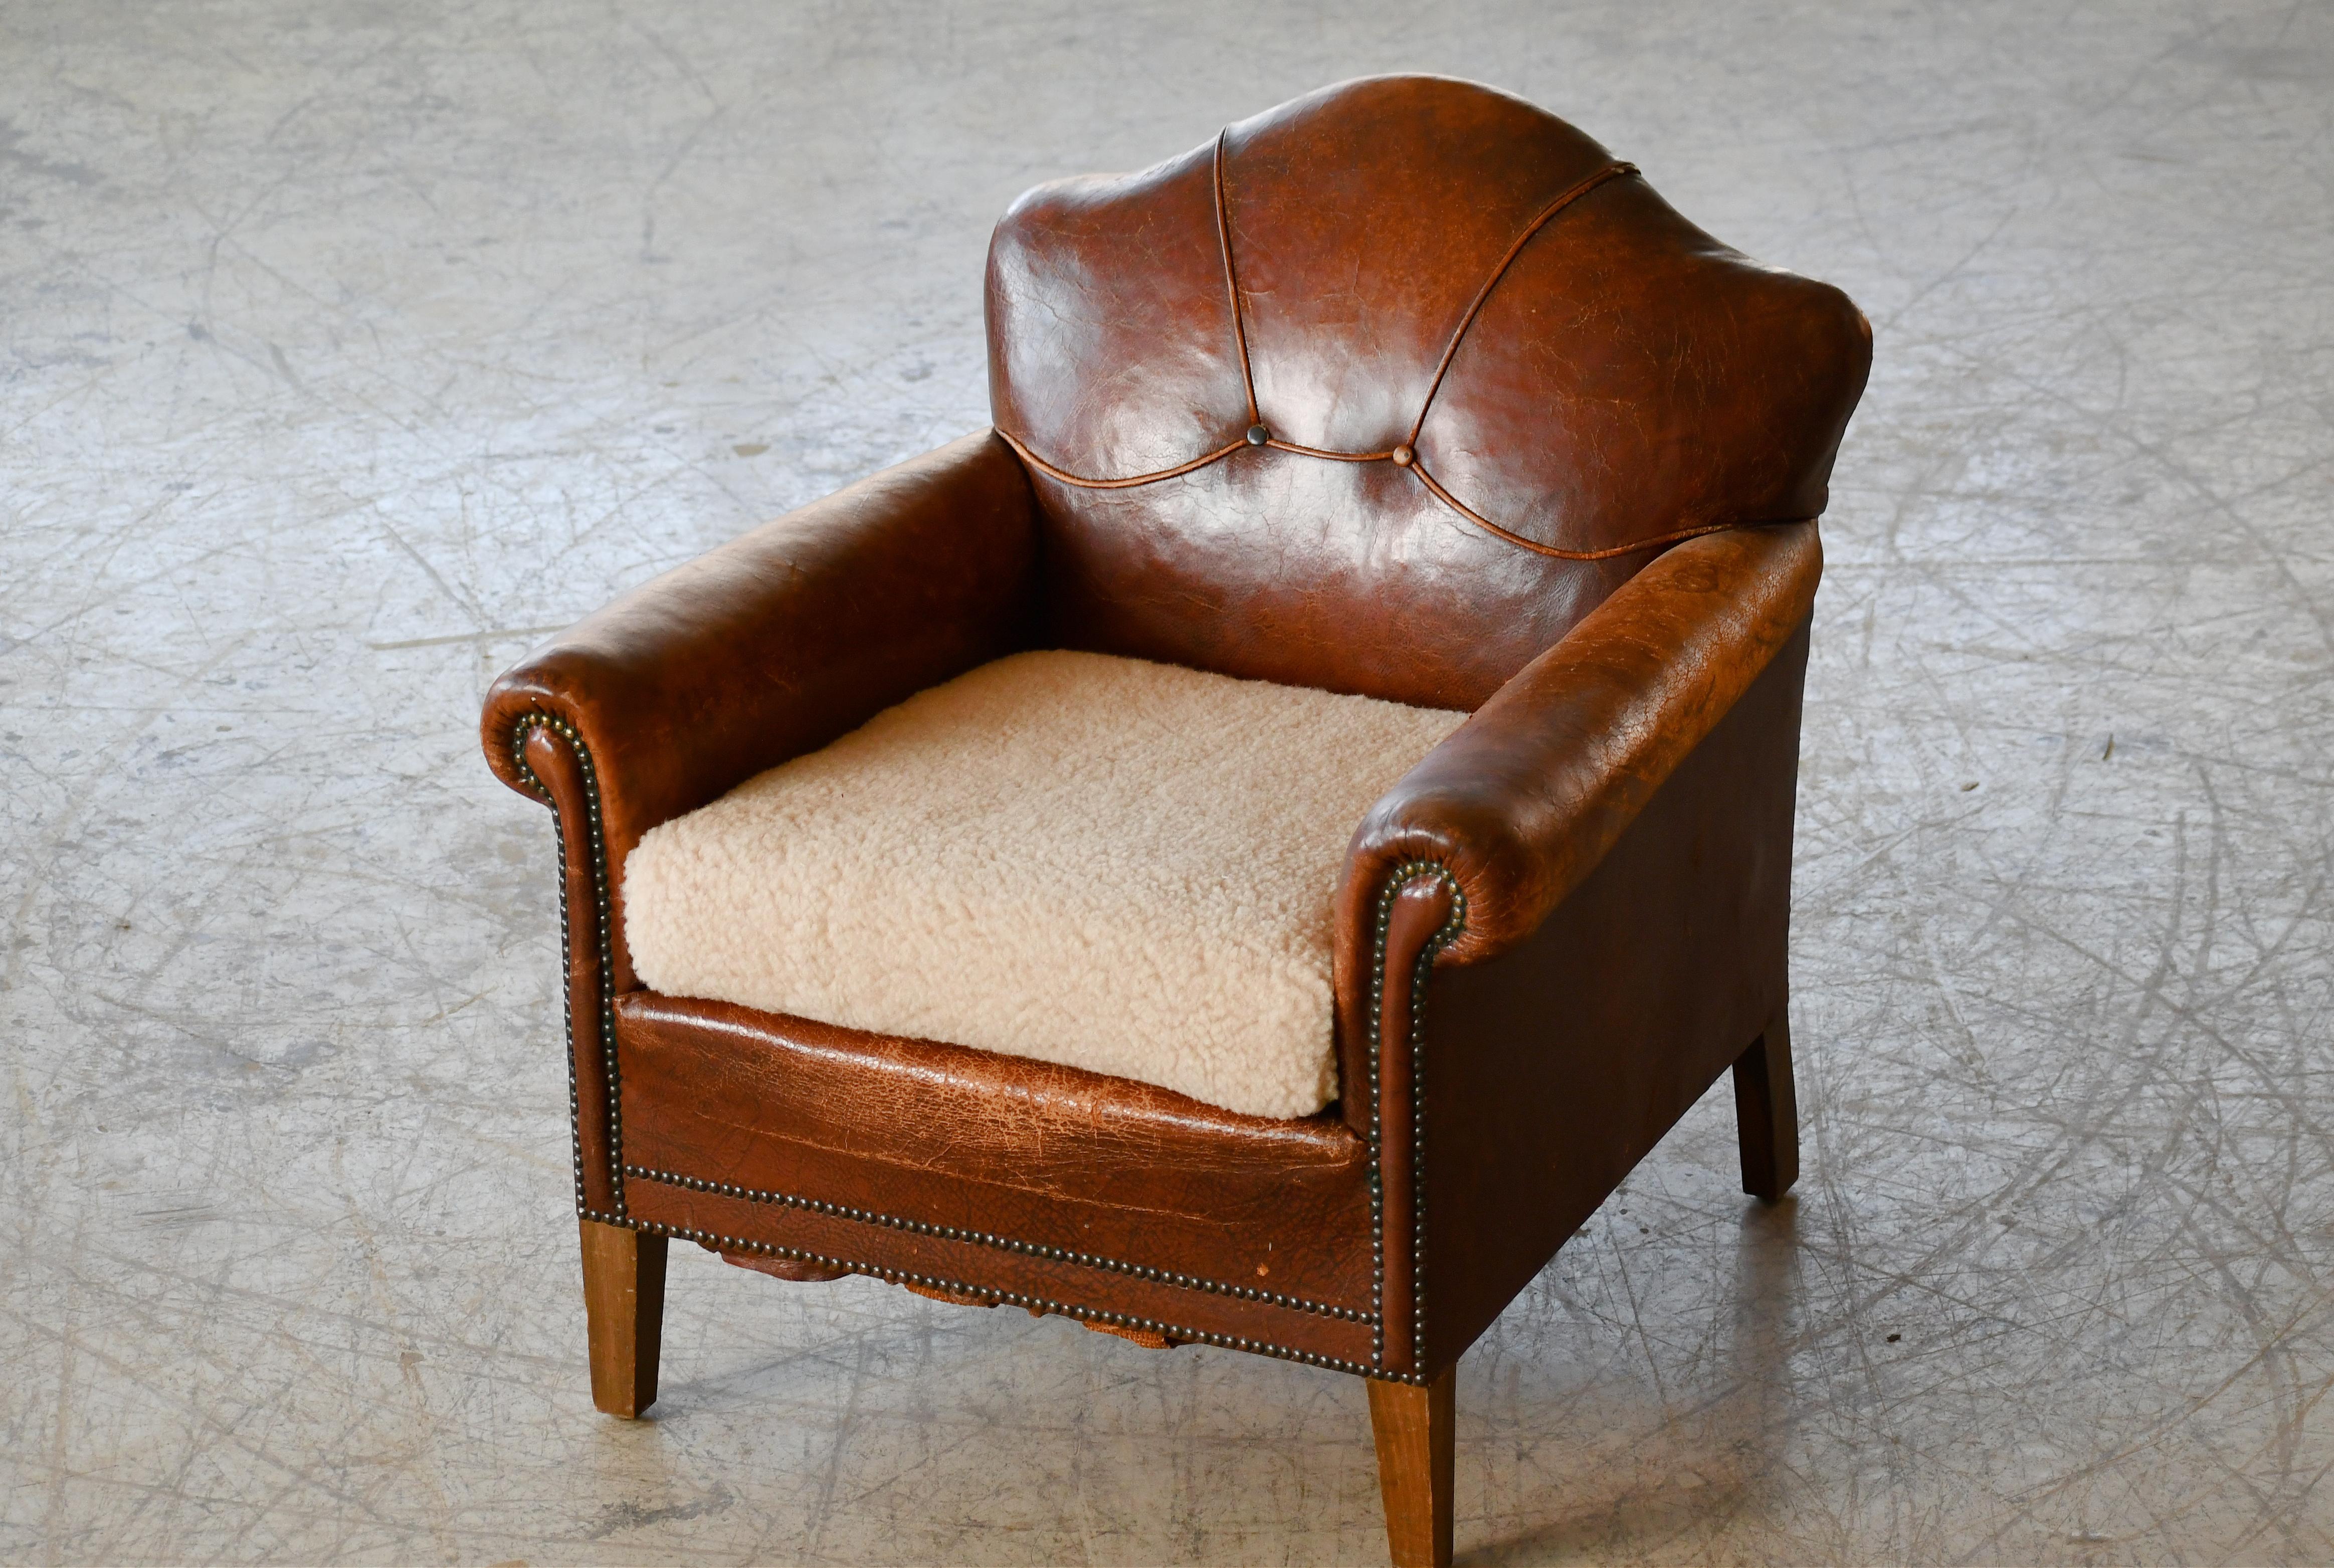 Charming cognac colored small scale Danish leather club chair made around the 1930's to 1940's. The Danes called these smaller type chairs for 